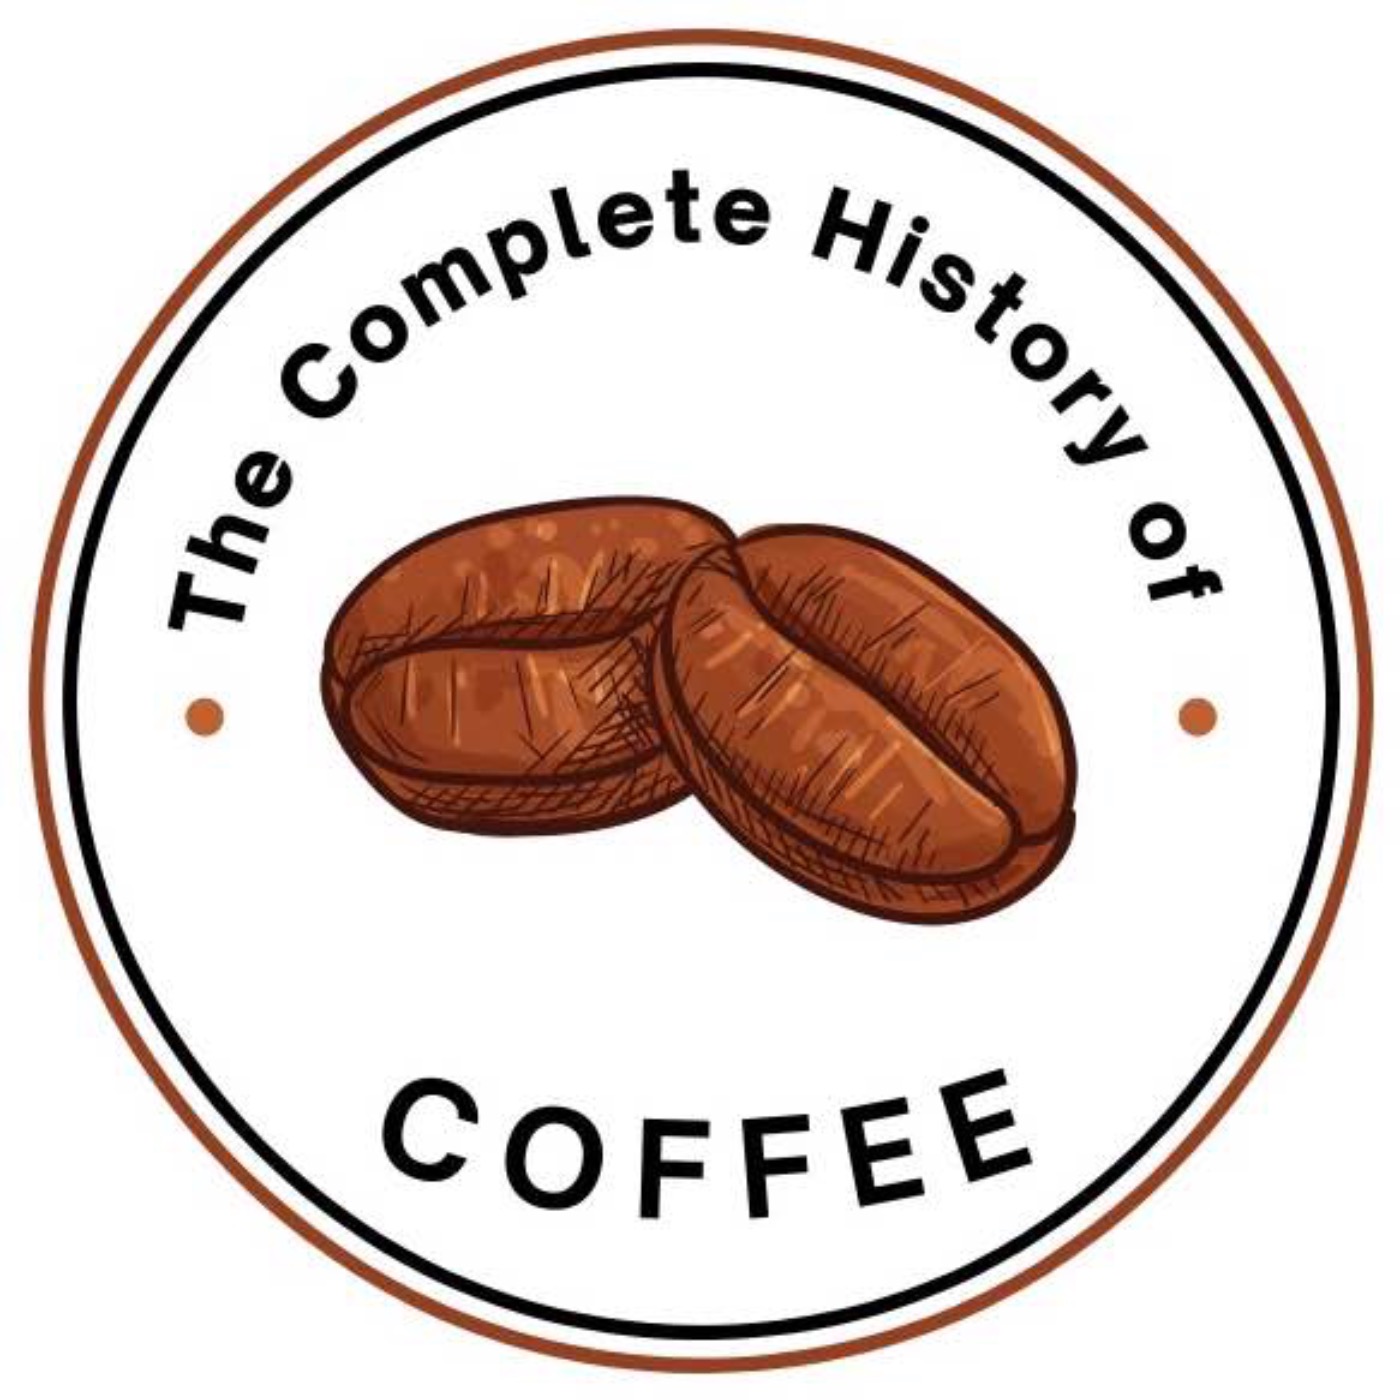 cover art for Complete History of Chocolate